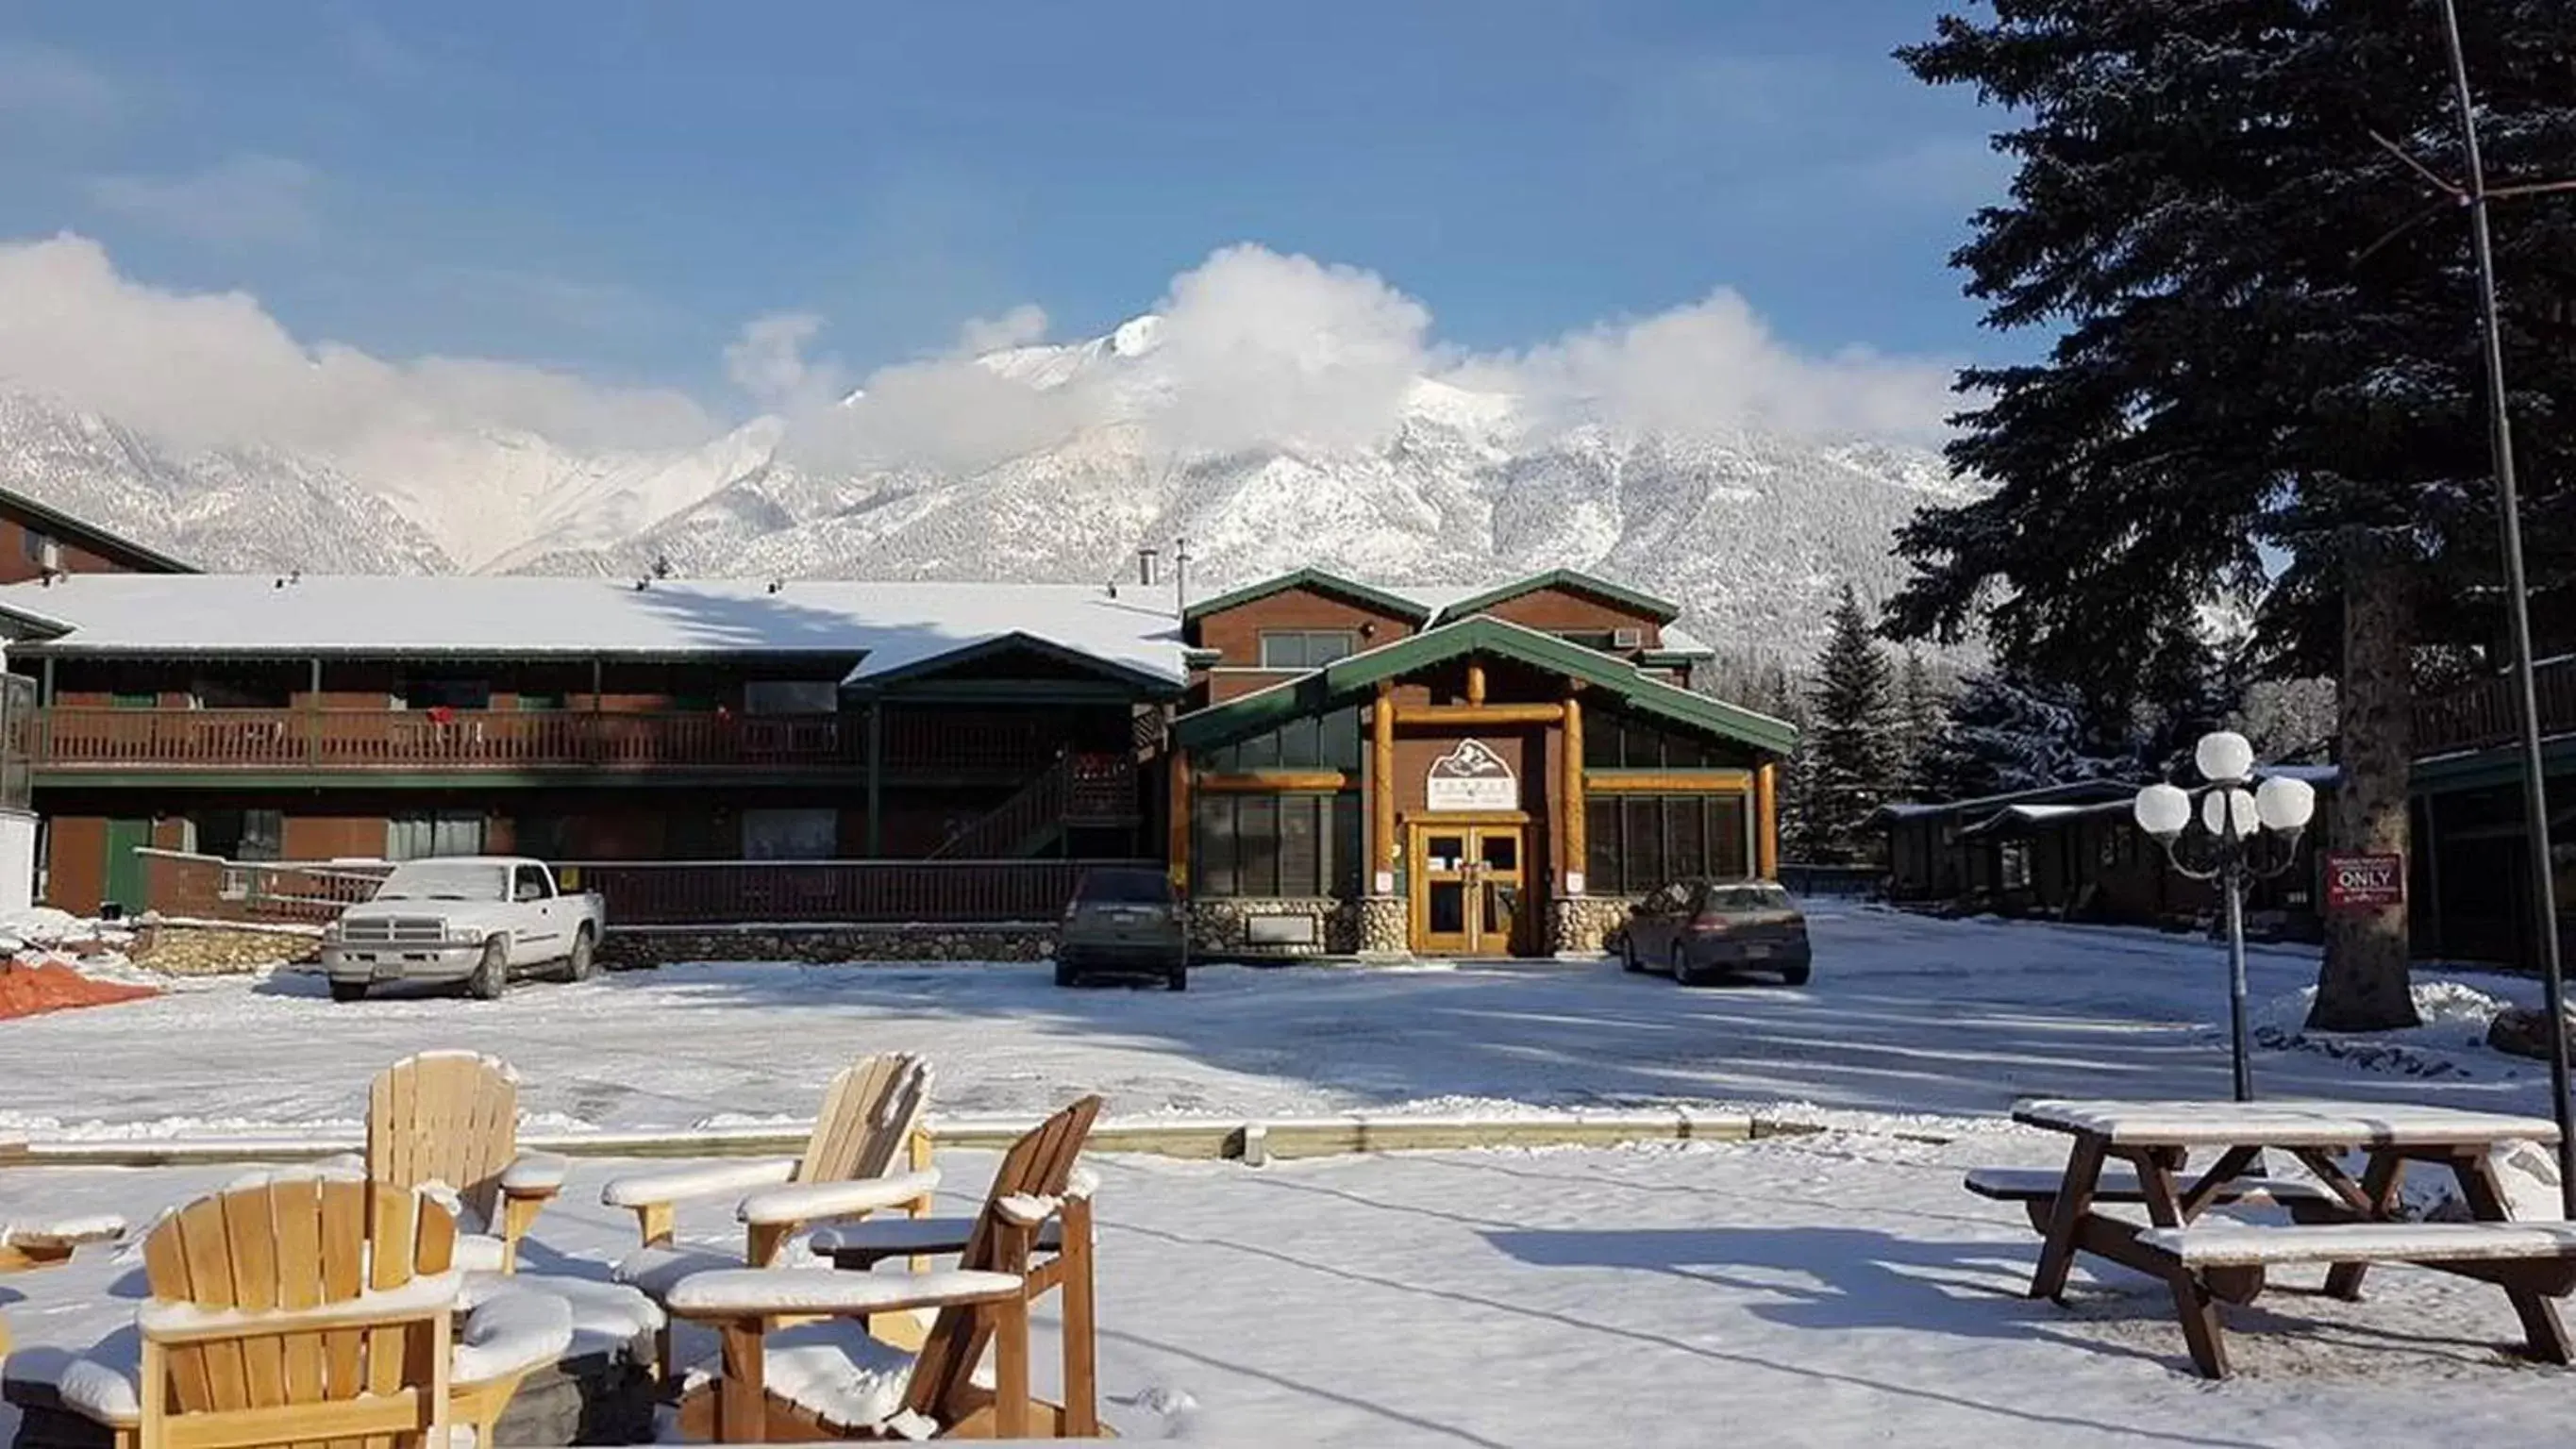 Property Building in Rundle Mountain Lodge